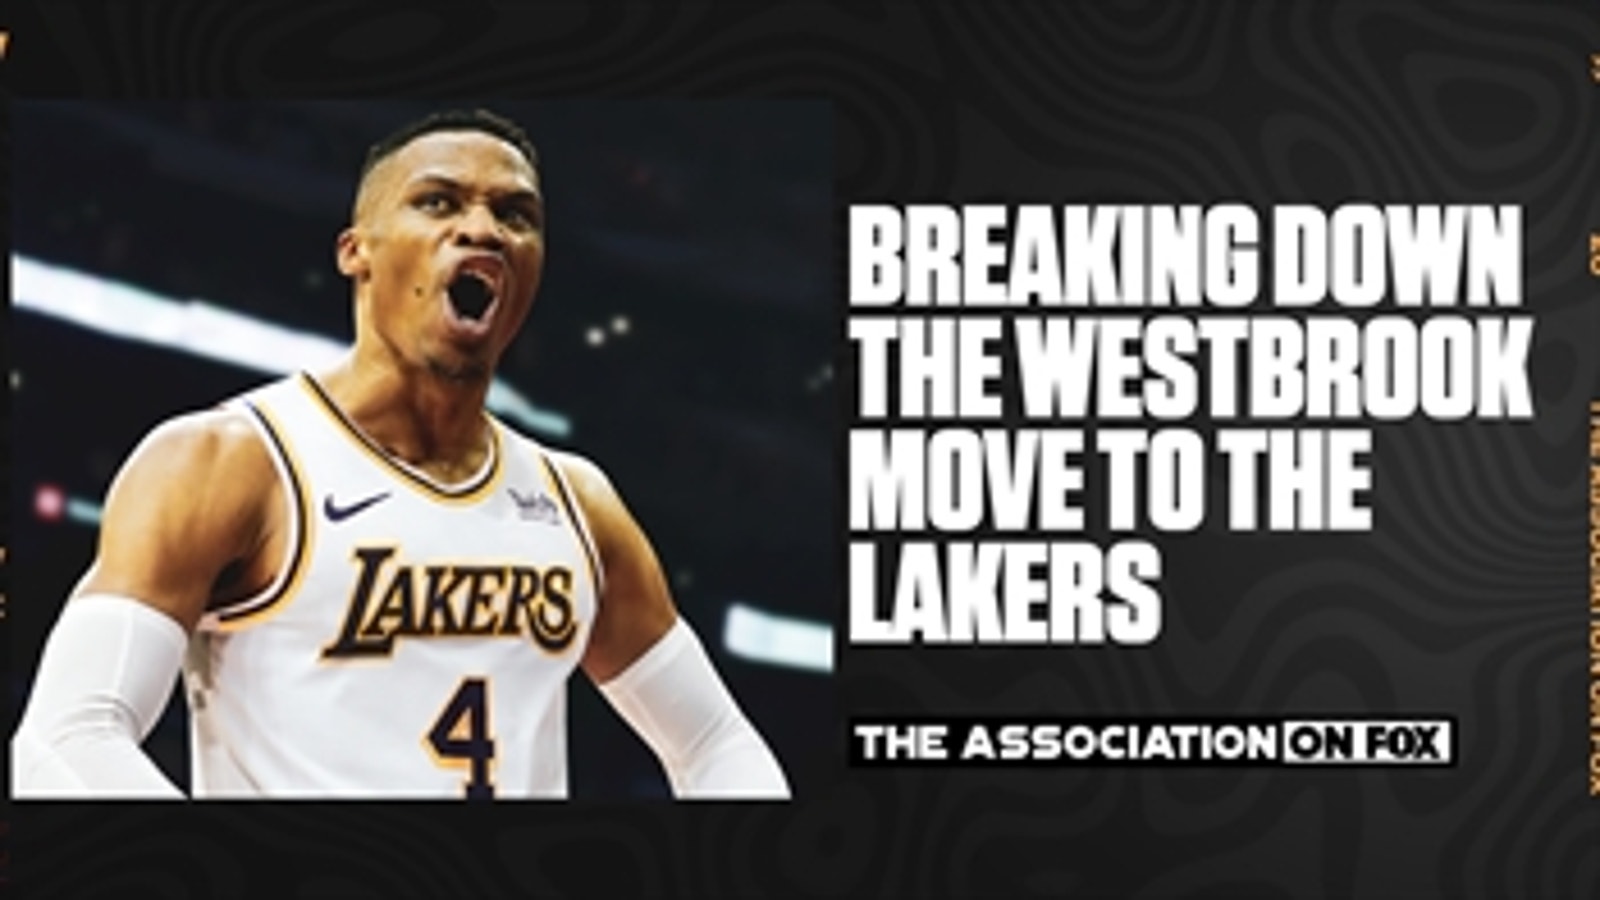 Russell Westbrook joins LeBron's Lakers, I give them a puncher's chance — Chris Broussard I FOX SPORTS